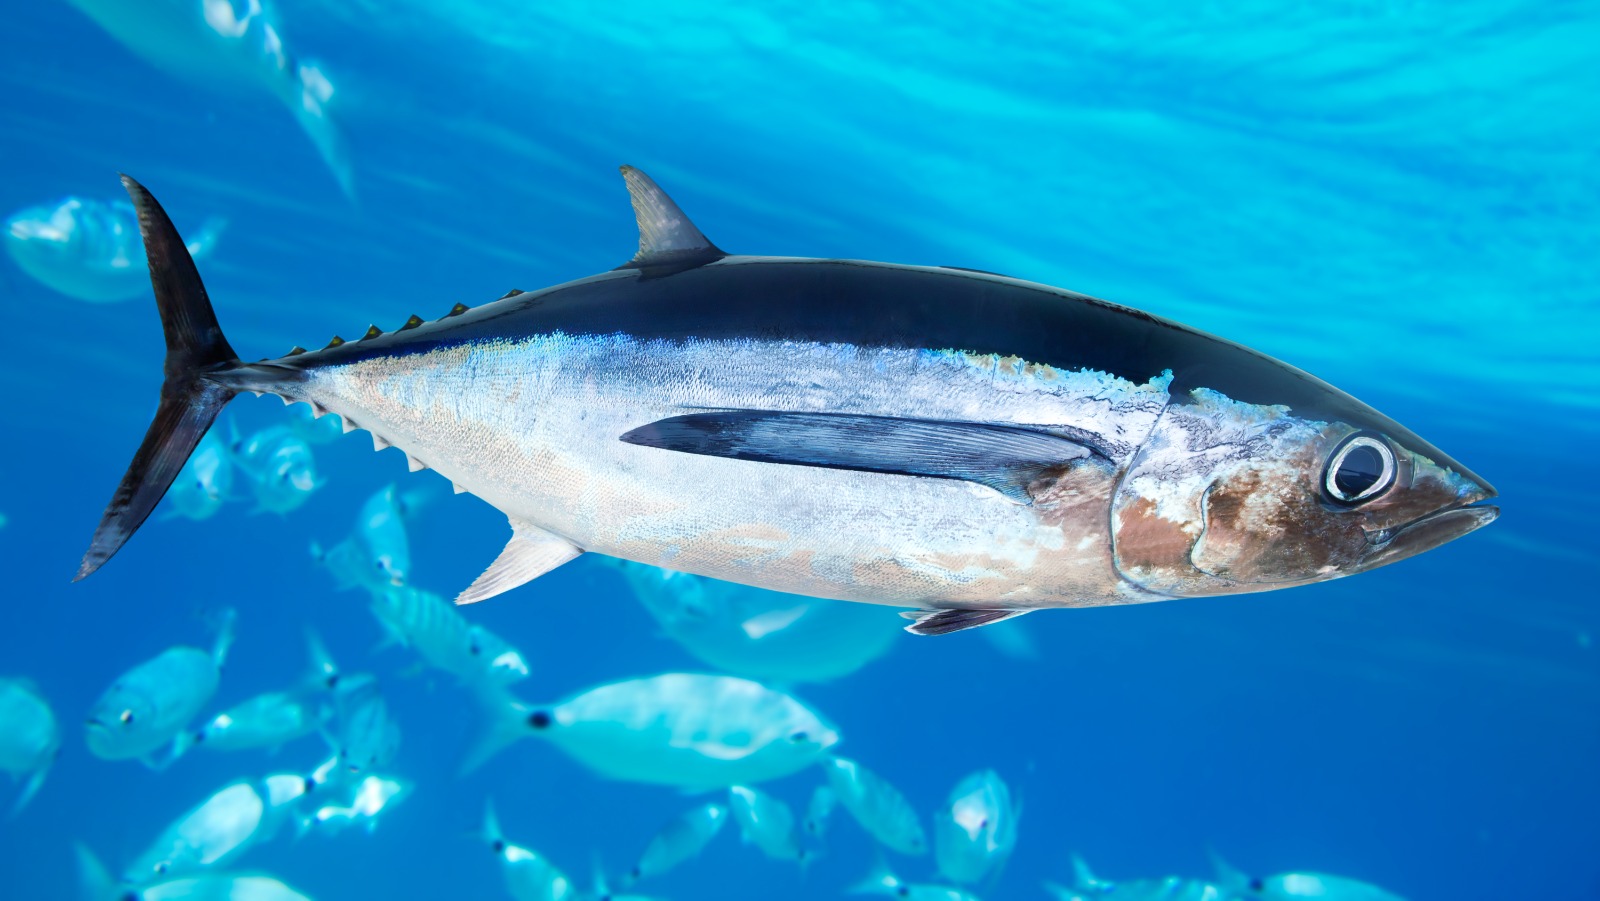 U of A researchers teamed up with colleagues in the United States to create an open-source database that will help scientists worldwide understand how top ocean predators like the albacore tuna will respond to climate extremes and changing prey over the coming decades. (Photo: Getty Images)